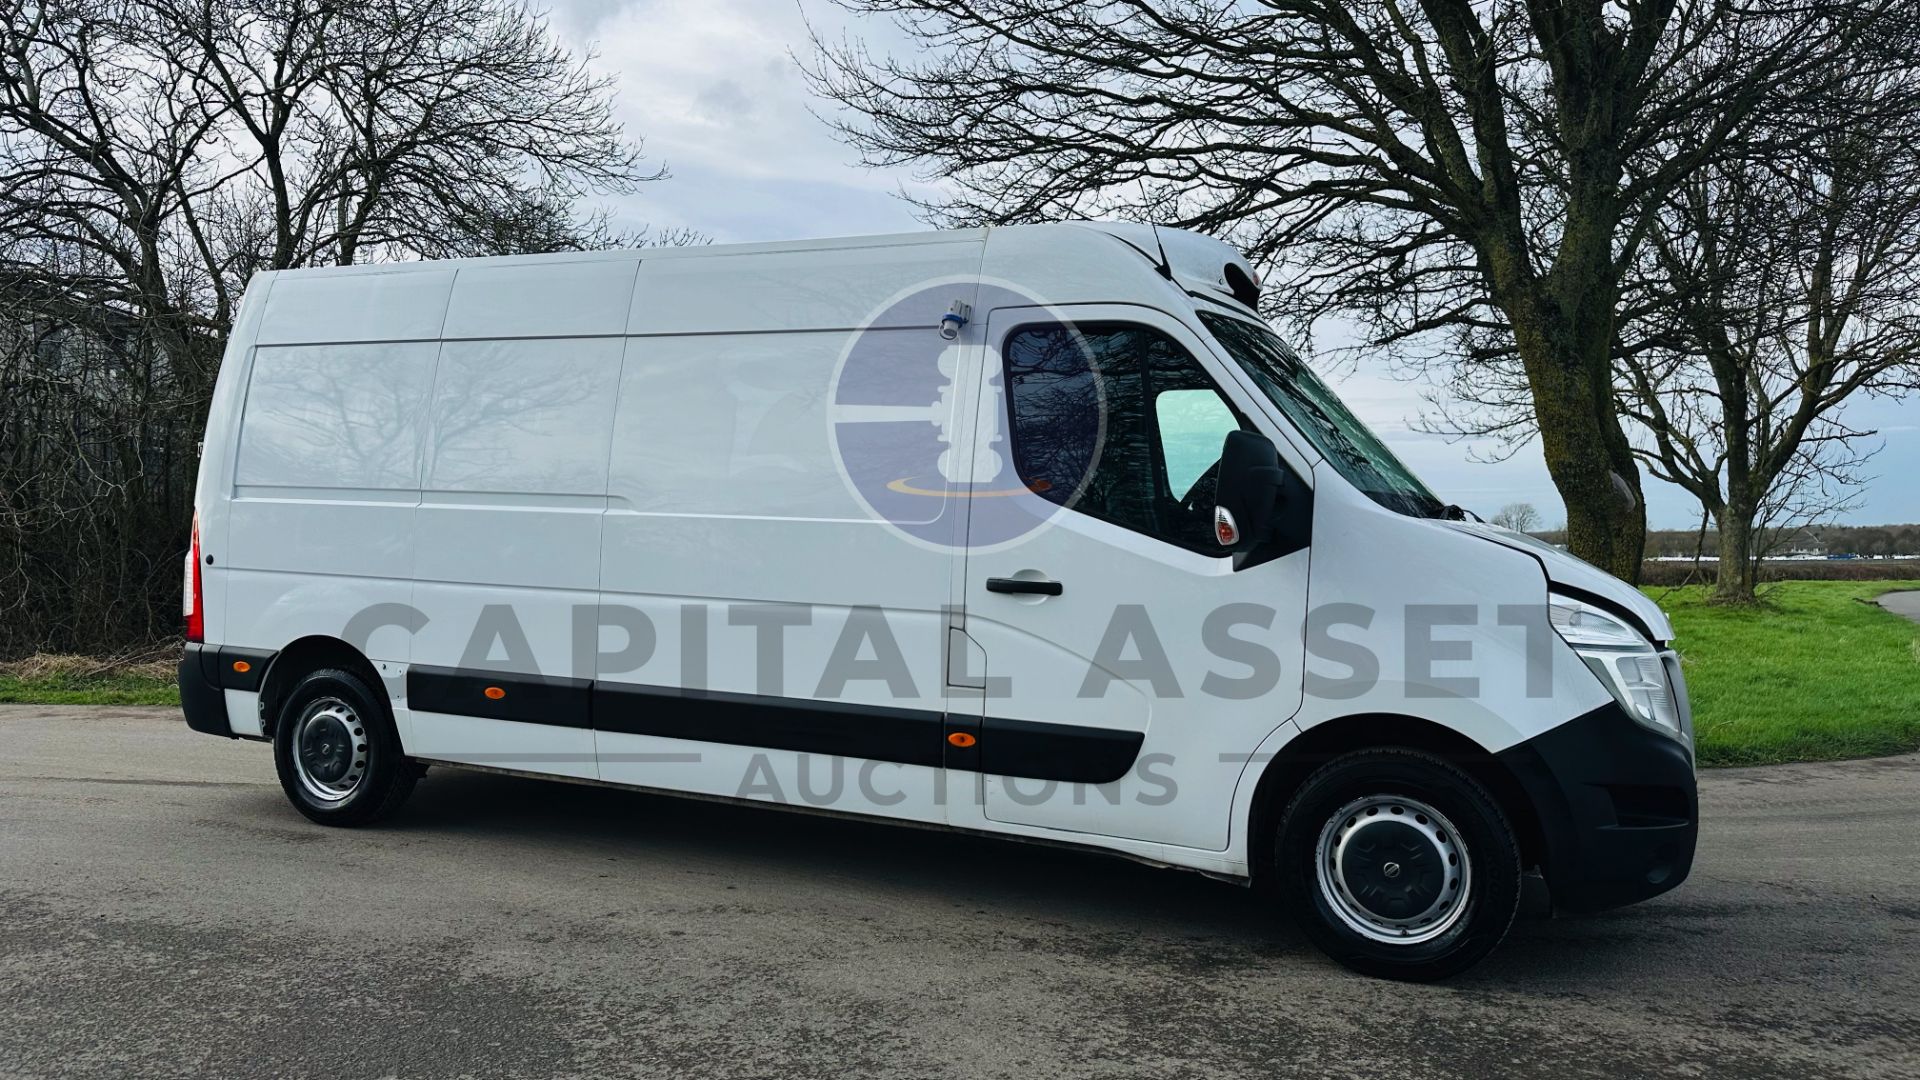 NISSAN NV400 SE *LWB - REFRIGERATED VAN* (2019 - EURO 6) 2.3 DCI - 6 SPEED *AIR CON* (1 OWNER)